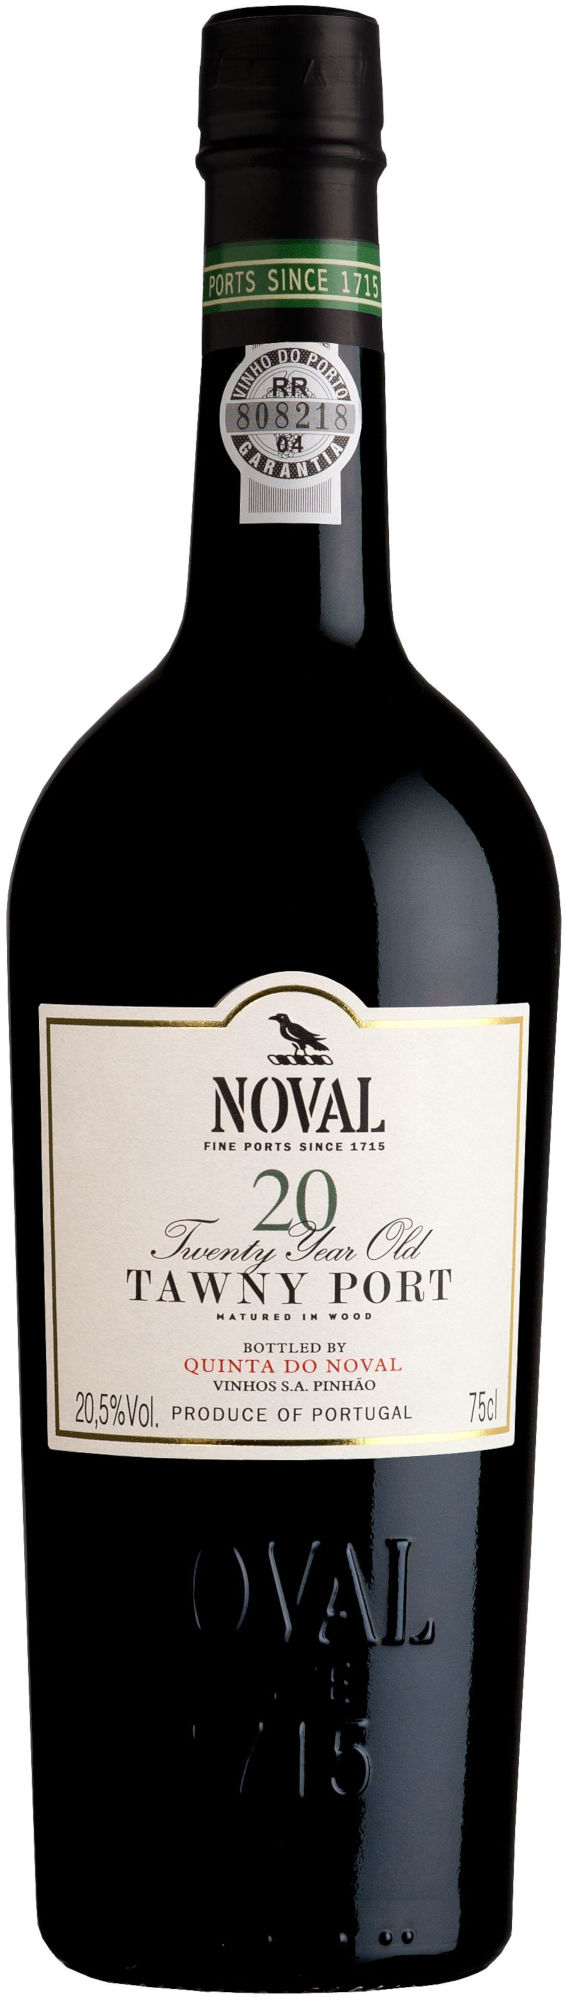 Noval-20-Years-Old-Tawny-Port